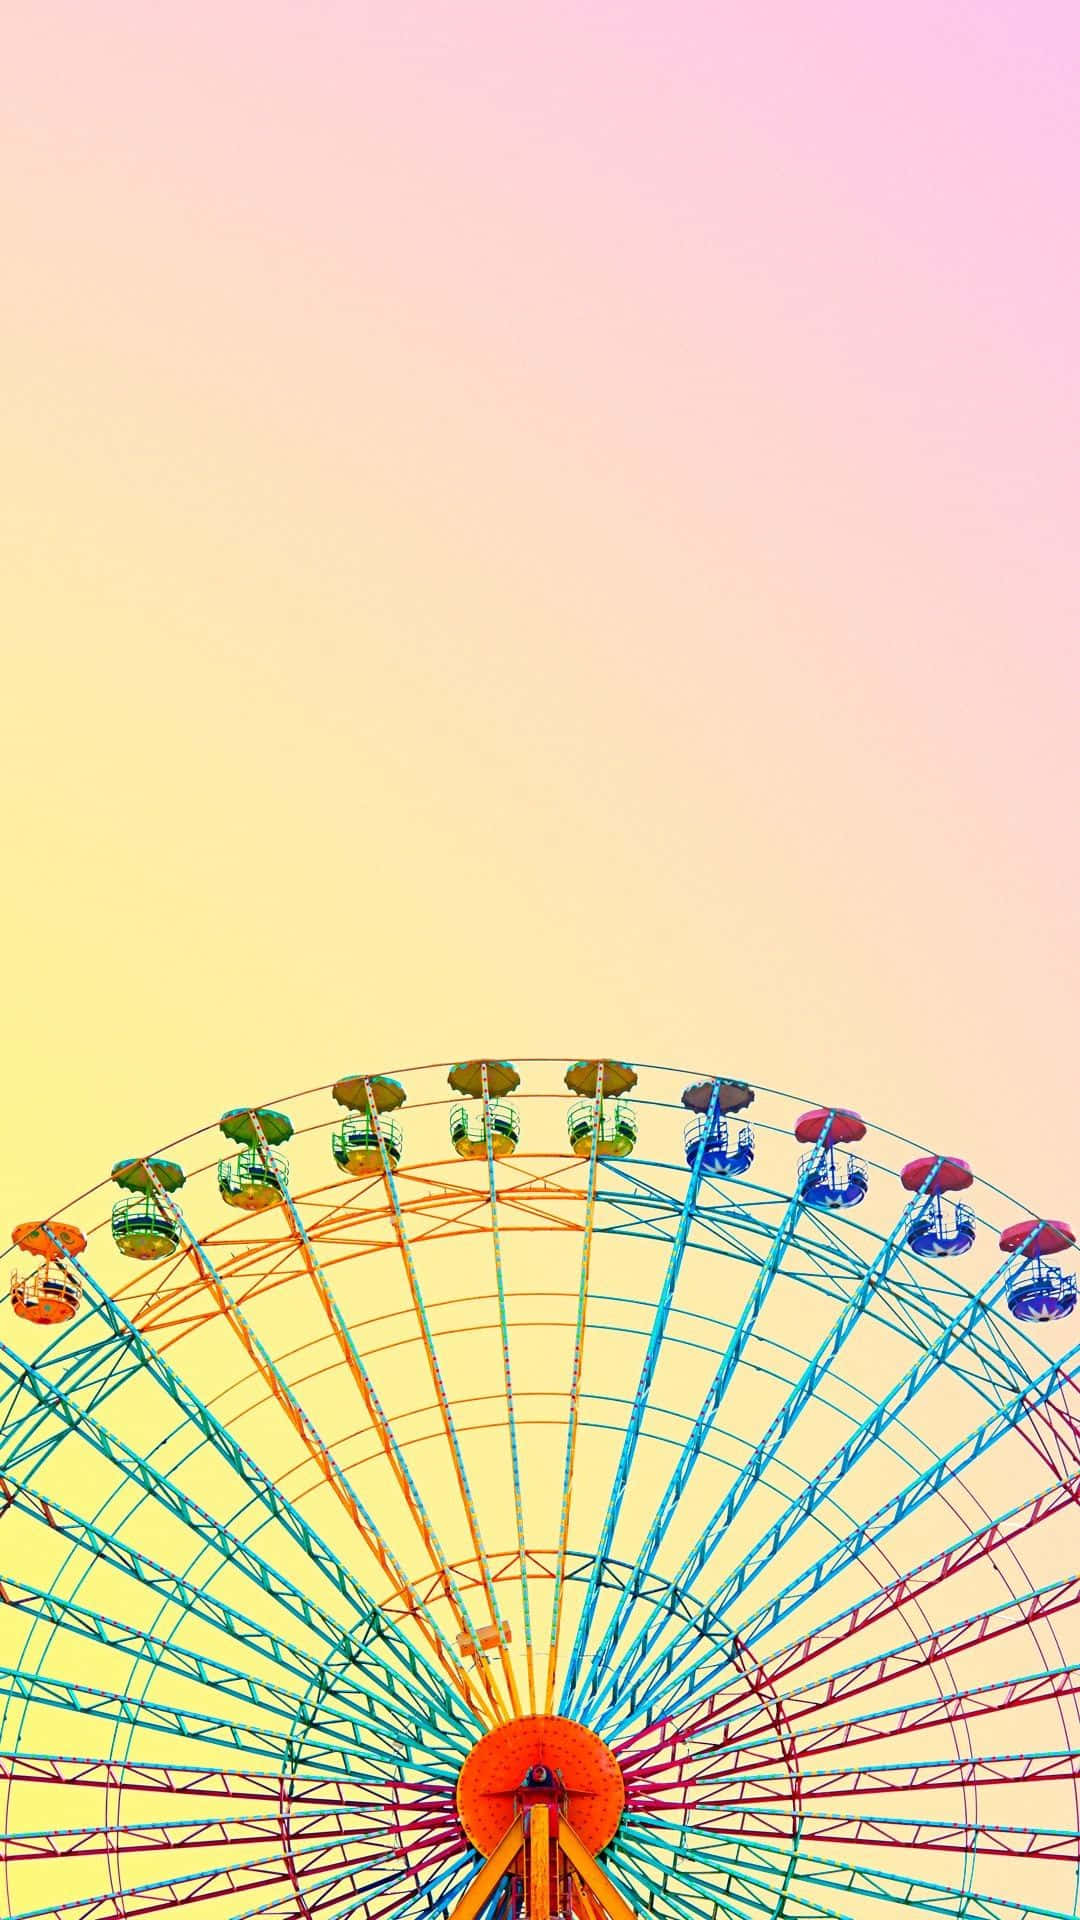 A New Way To Express Yourself: Pastel Rainbow IPhone Wallpaper